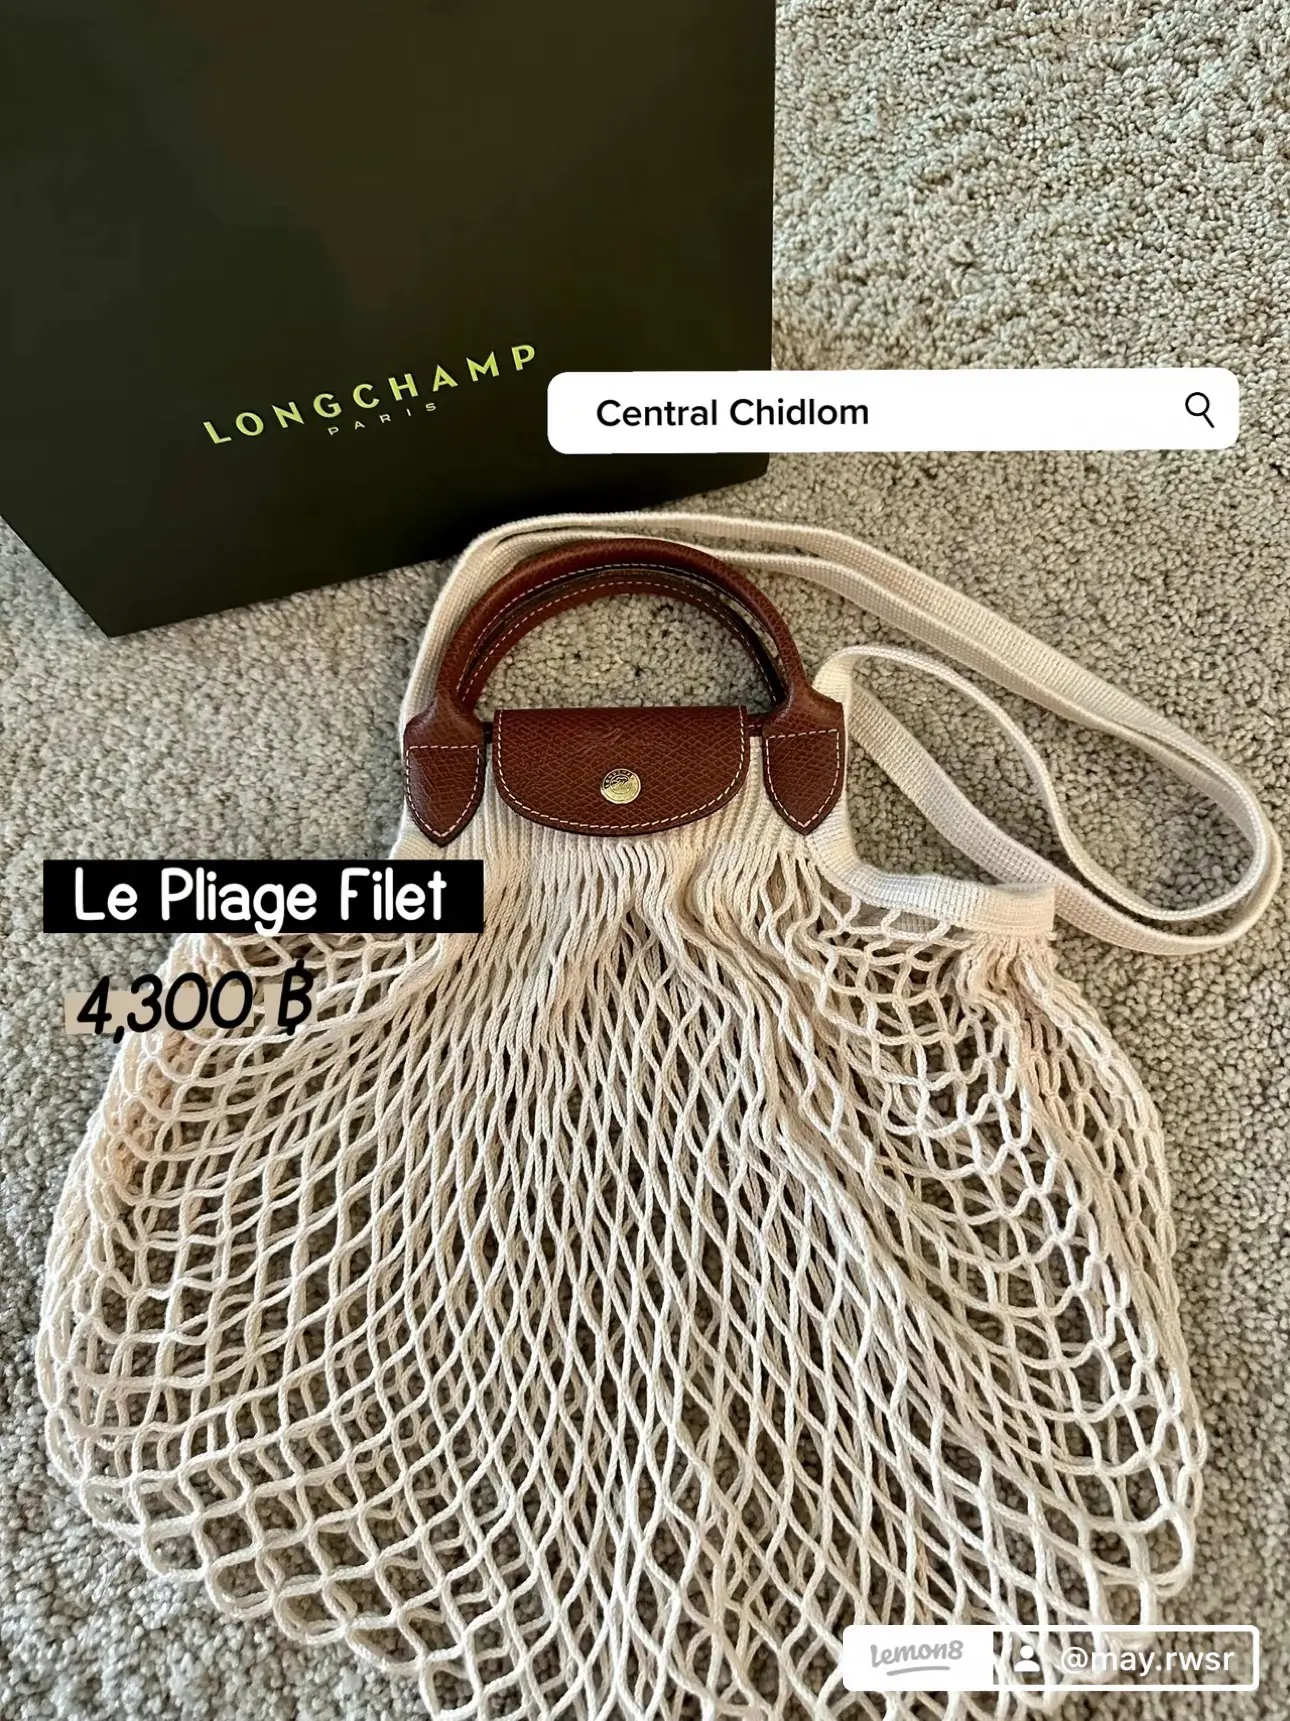 SOLD OUT ! Longchamp Le Pliage Filet coming in 2 weeks time